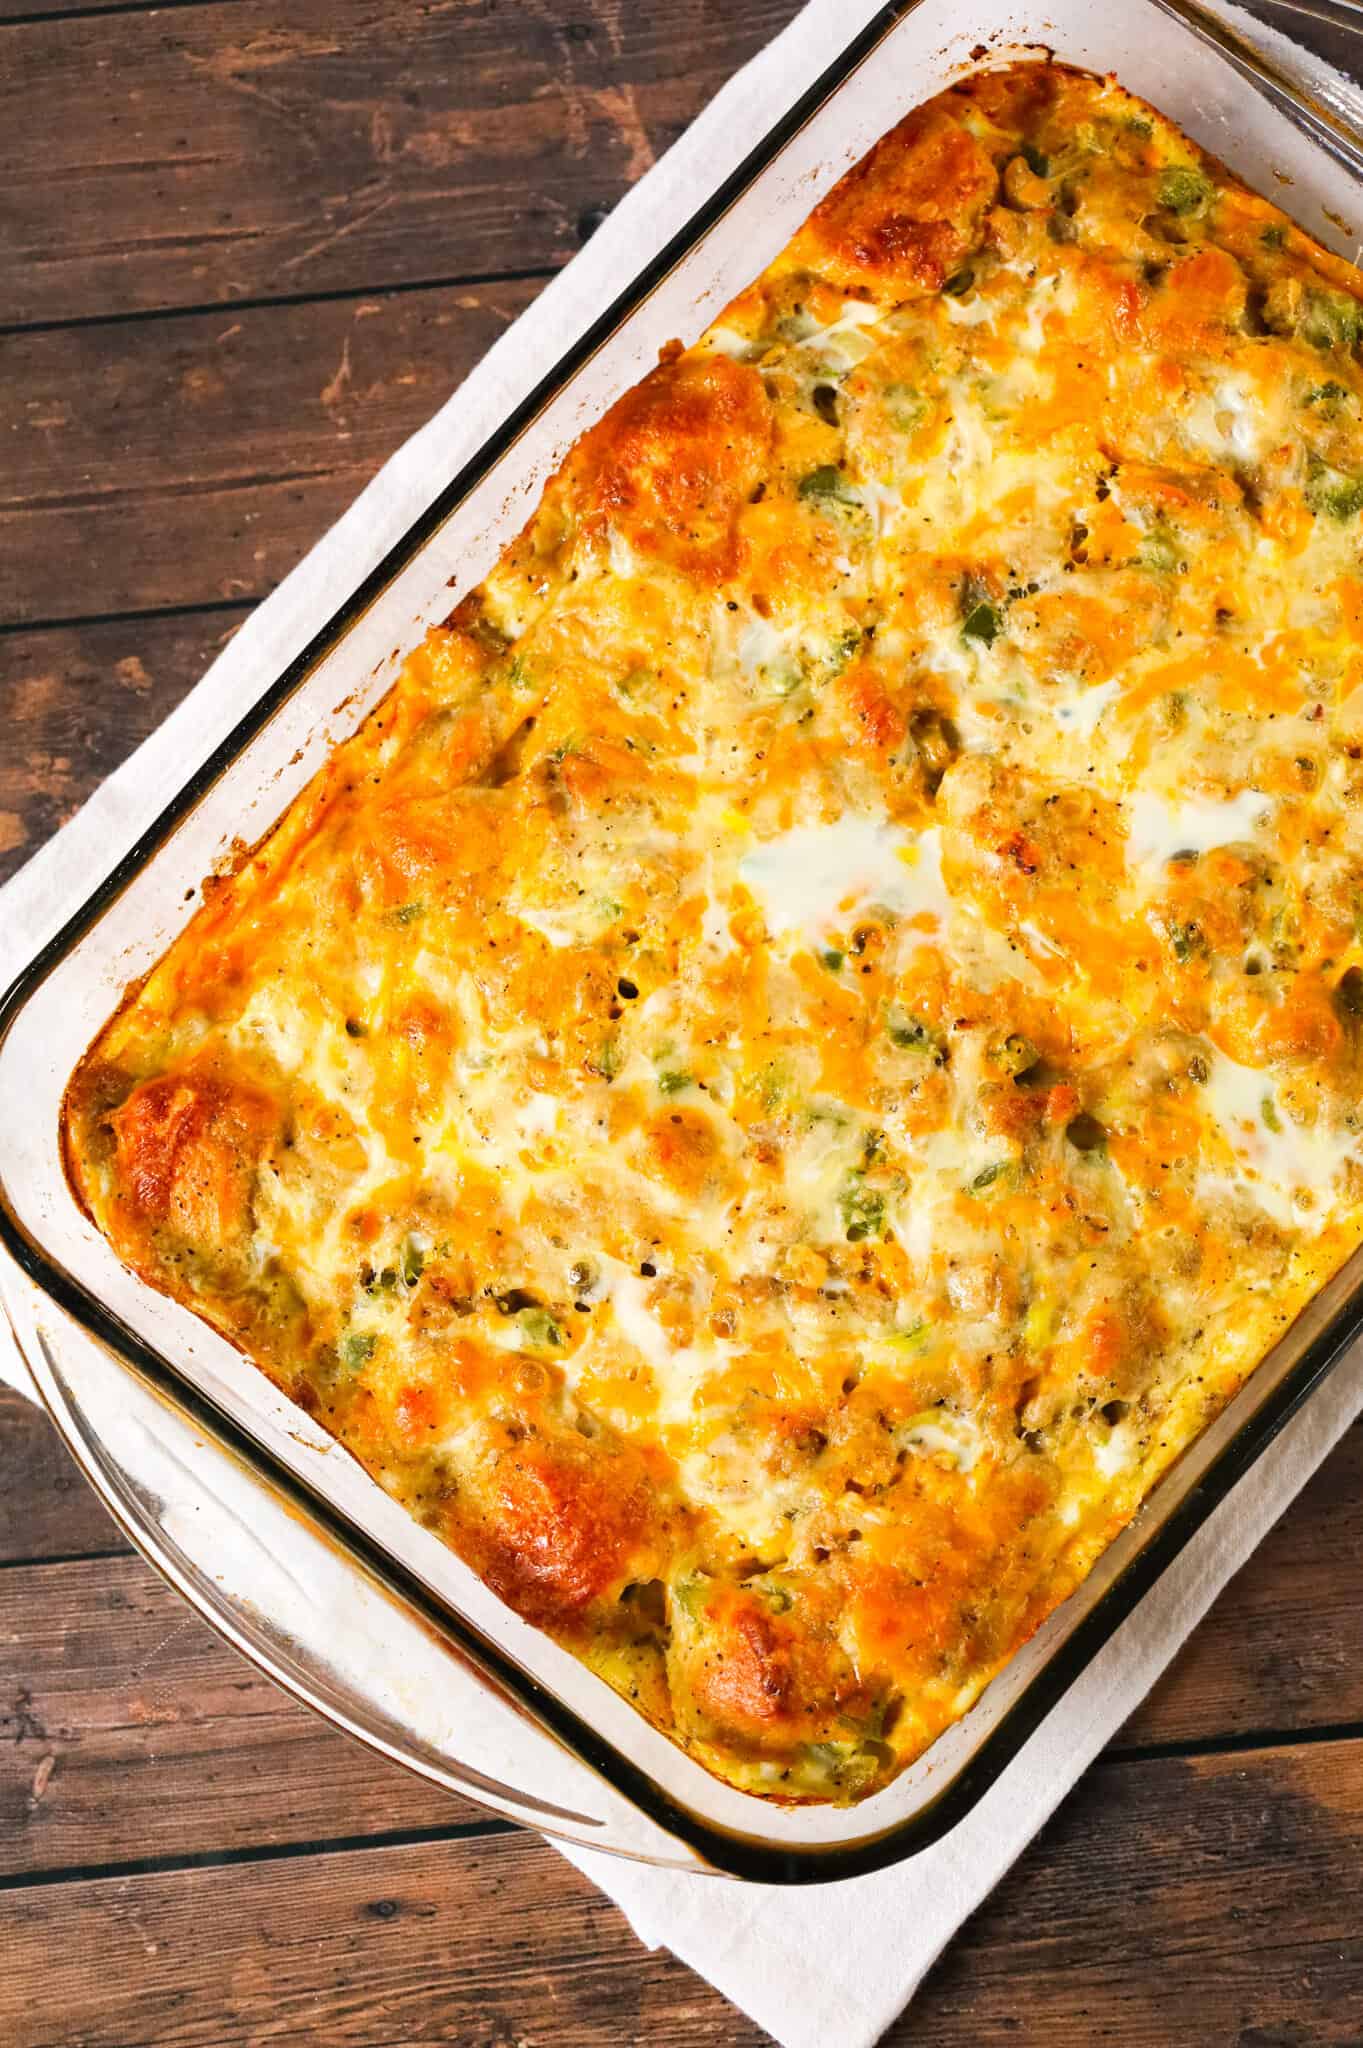 Breakfast Casserole with Biscuits is an easy breakfast dish loaded with sausage, egg, green peppers, Pillsbury biscuits and shredded cheese.